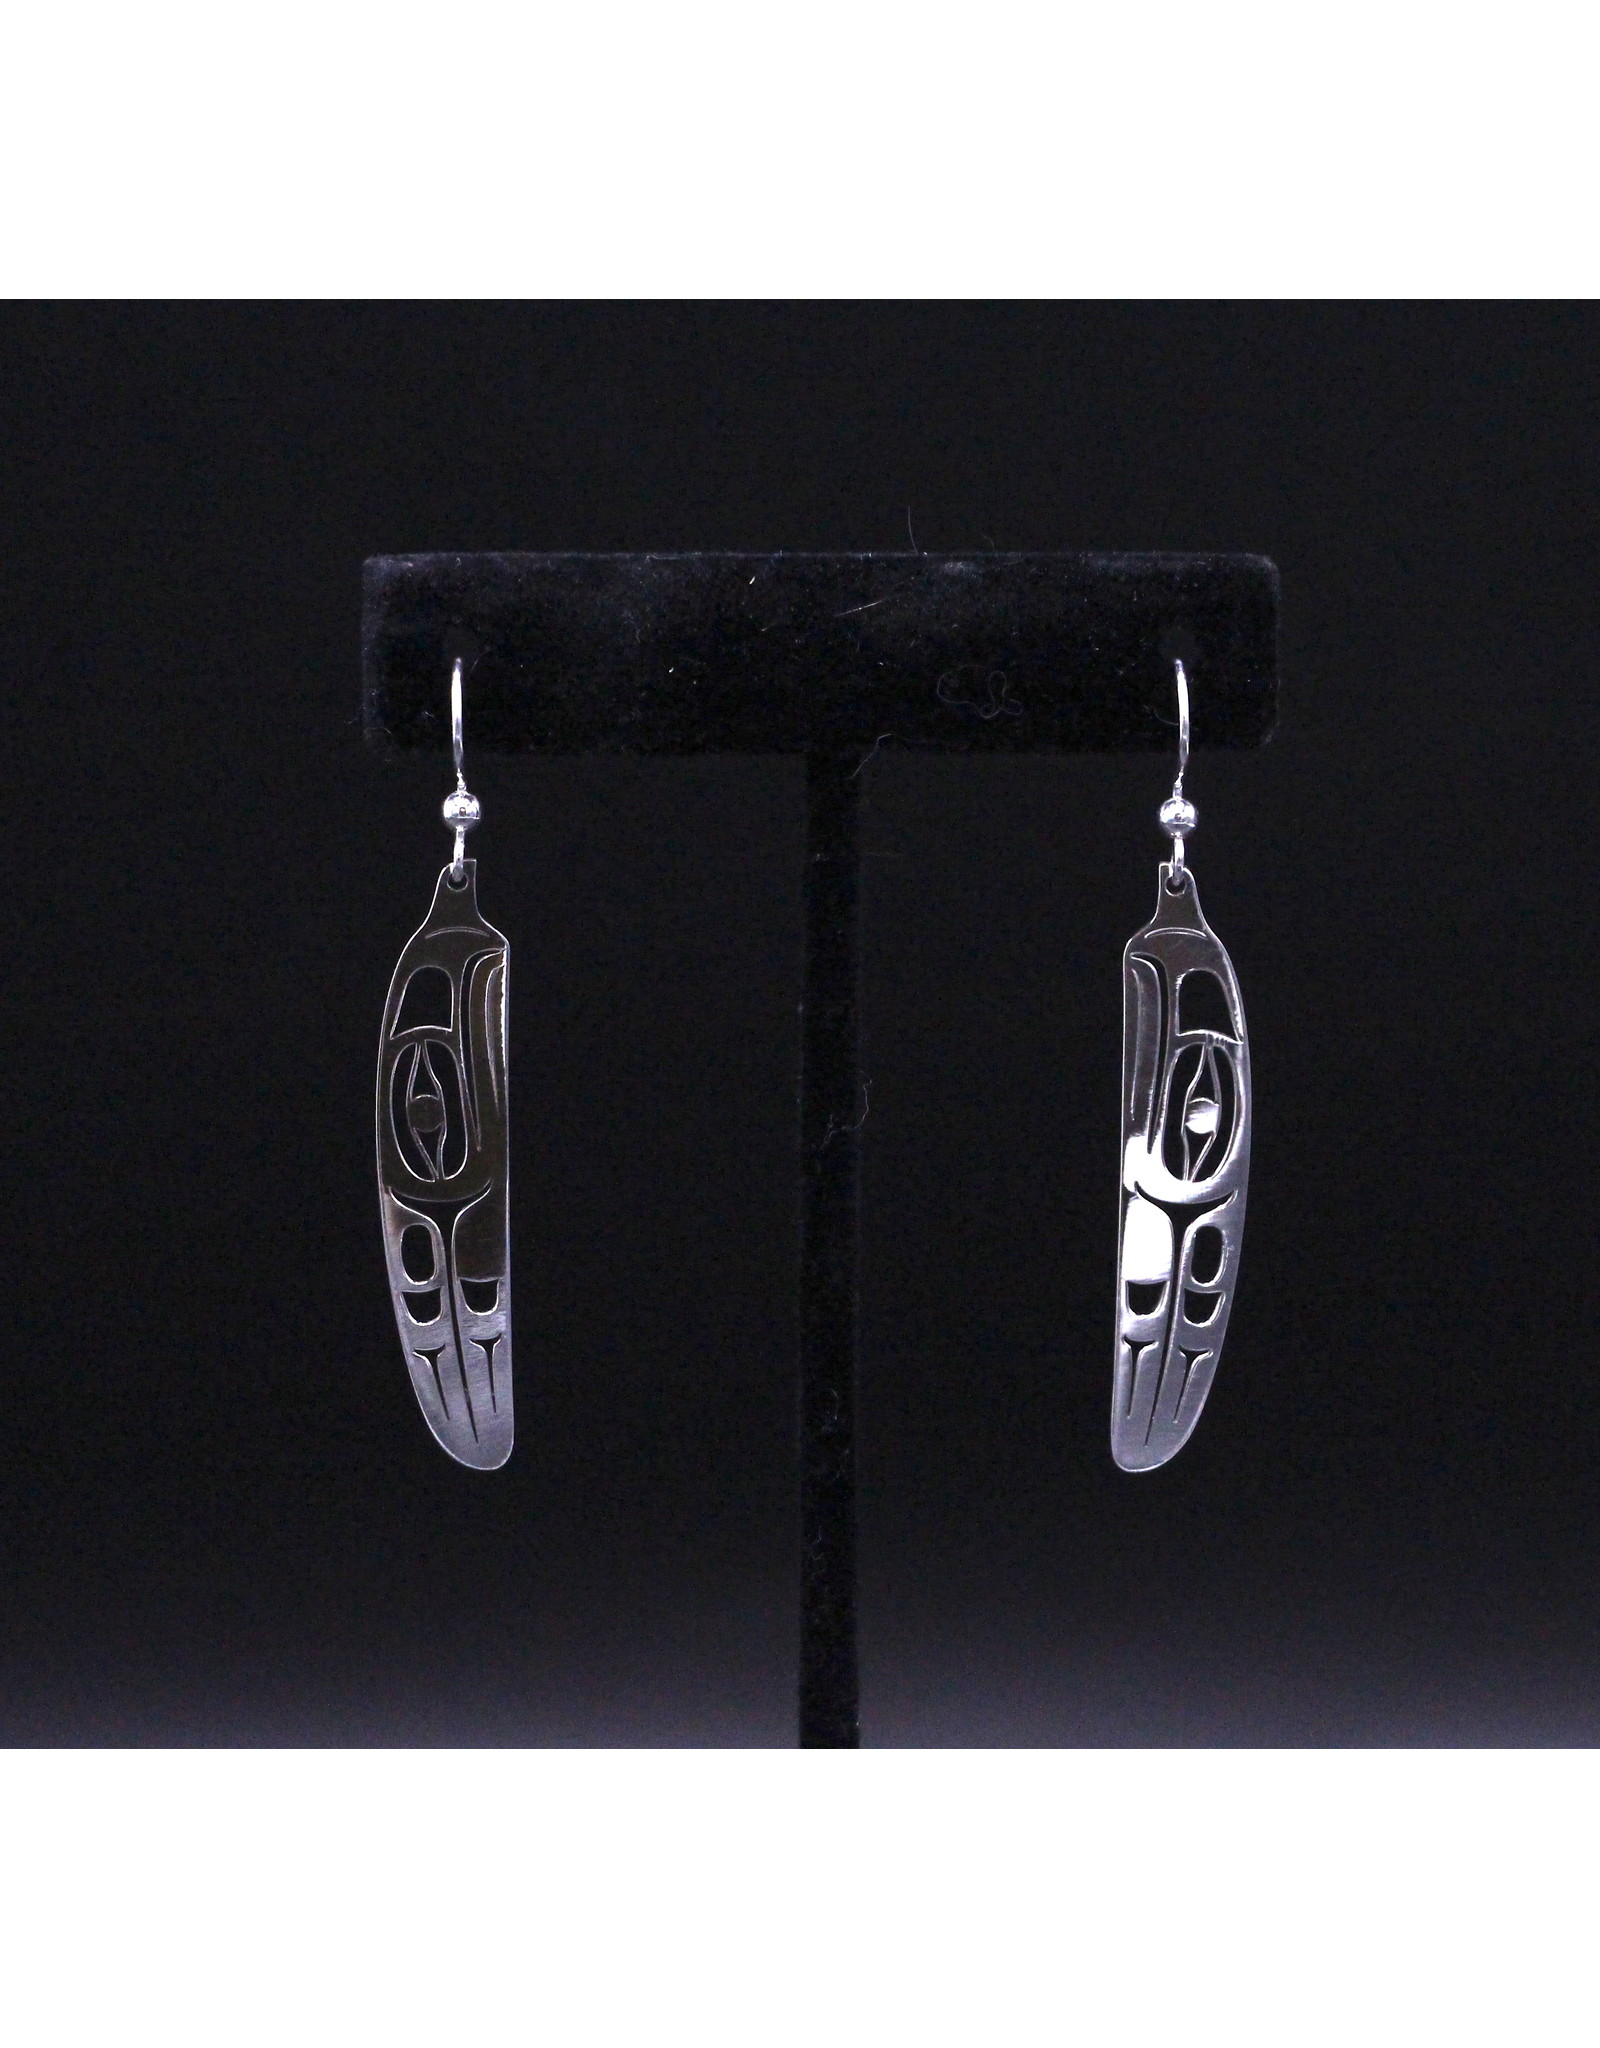 Raven/Crow Feather Earrings by Grant Pauls- GPE05